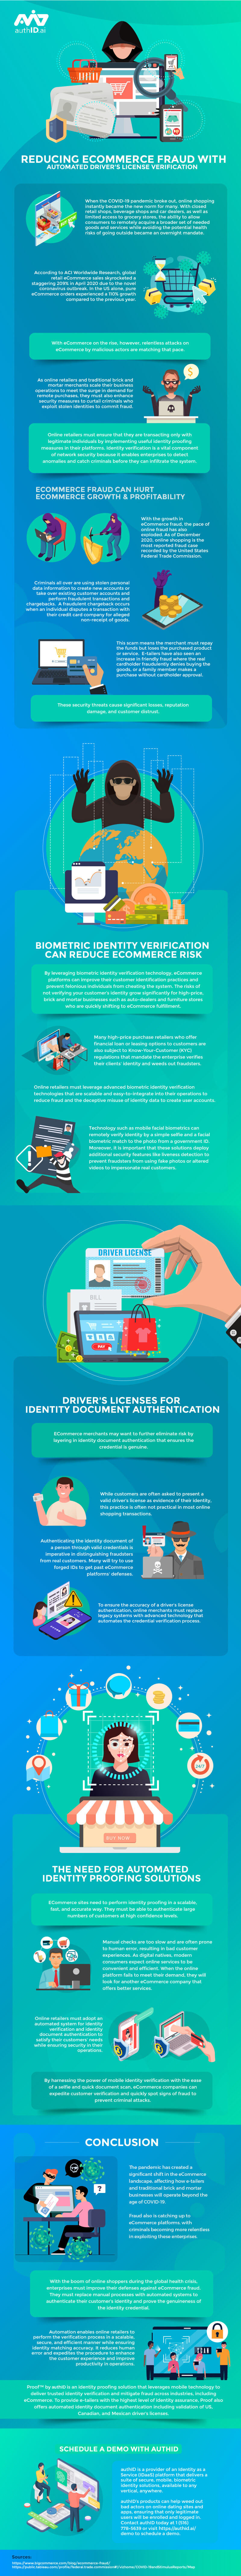 Reducing_eCommerce_Fraud_with_Automated_Driver_s_License_Verification-05